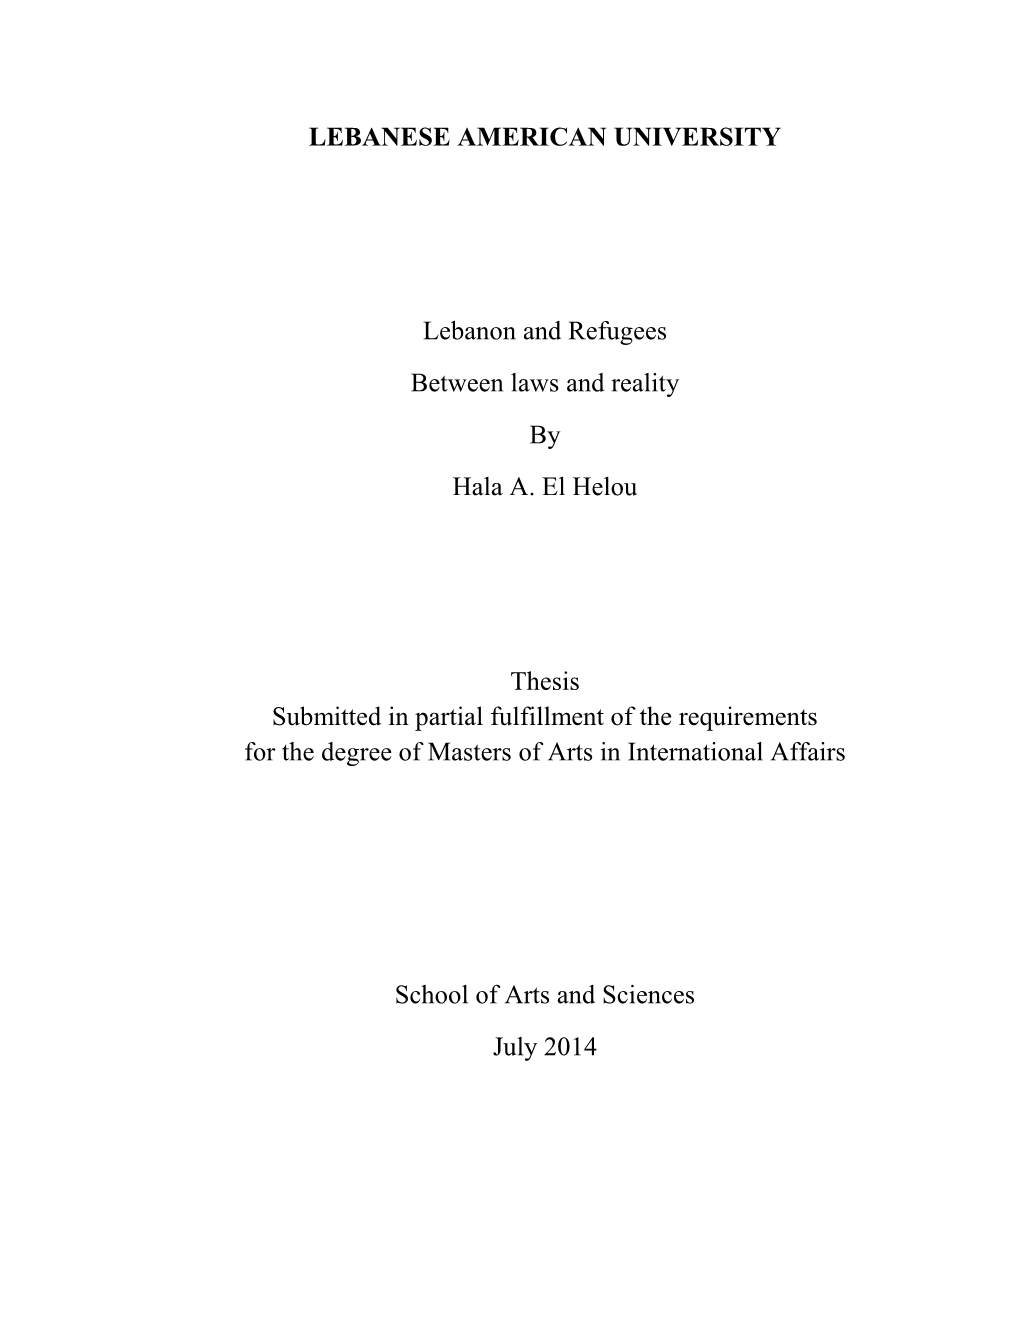 LEBANESE AMERICAN UNIVERSITY Lebanon and Refugees Between Laws and Reality by Hala A. El Helou Thesis Submitted in Partial Fulfi